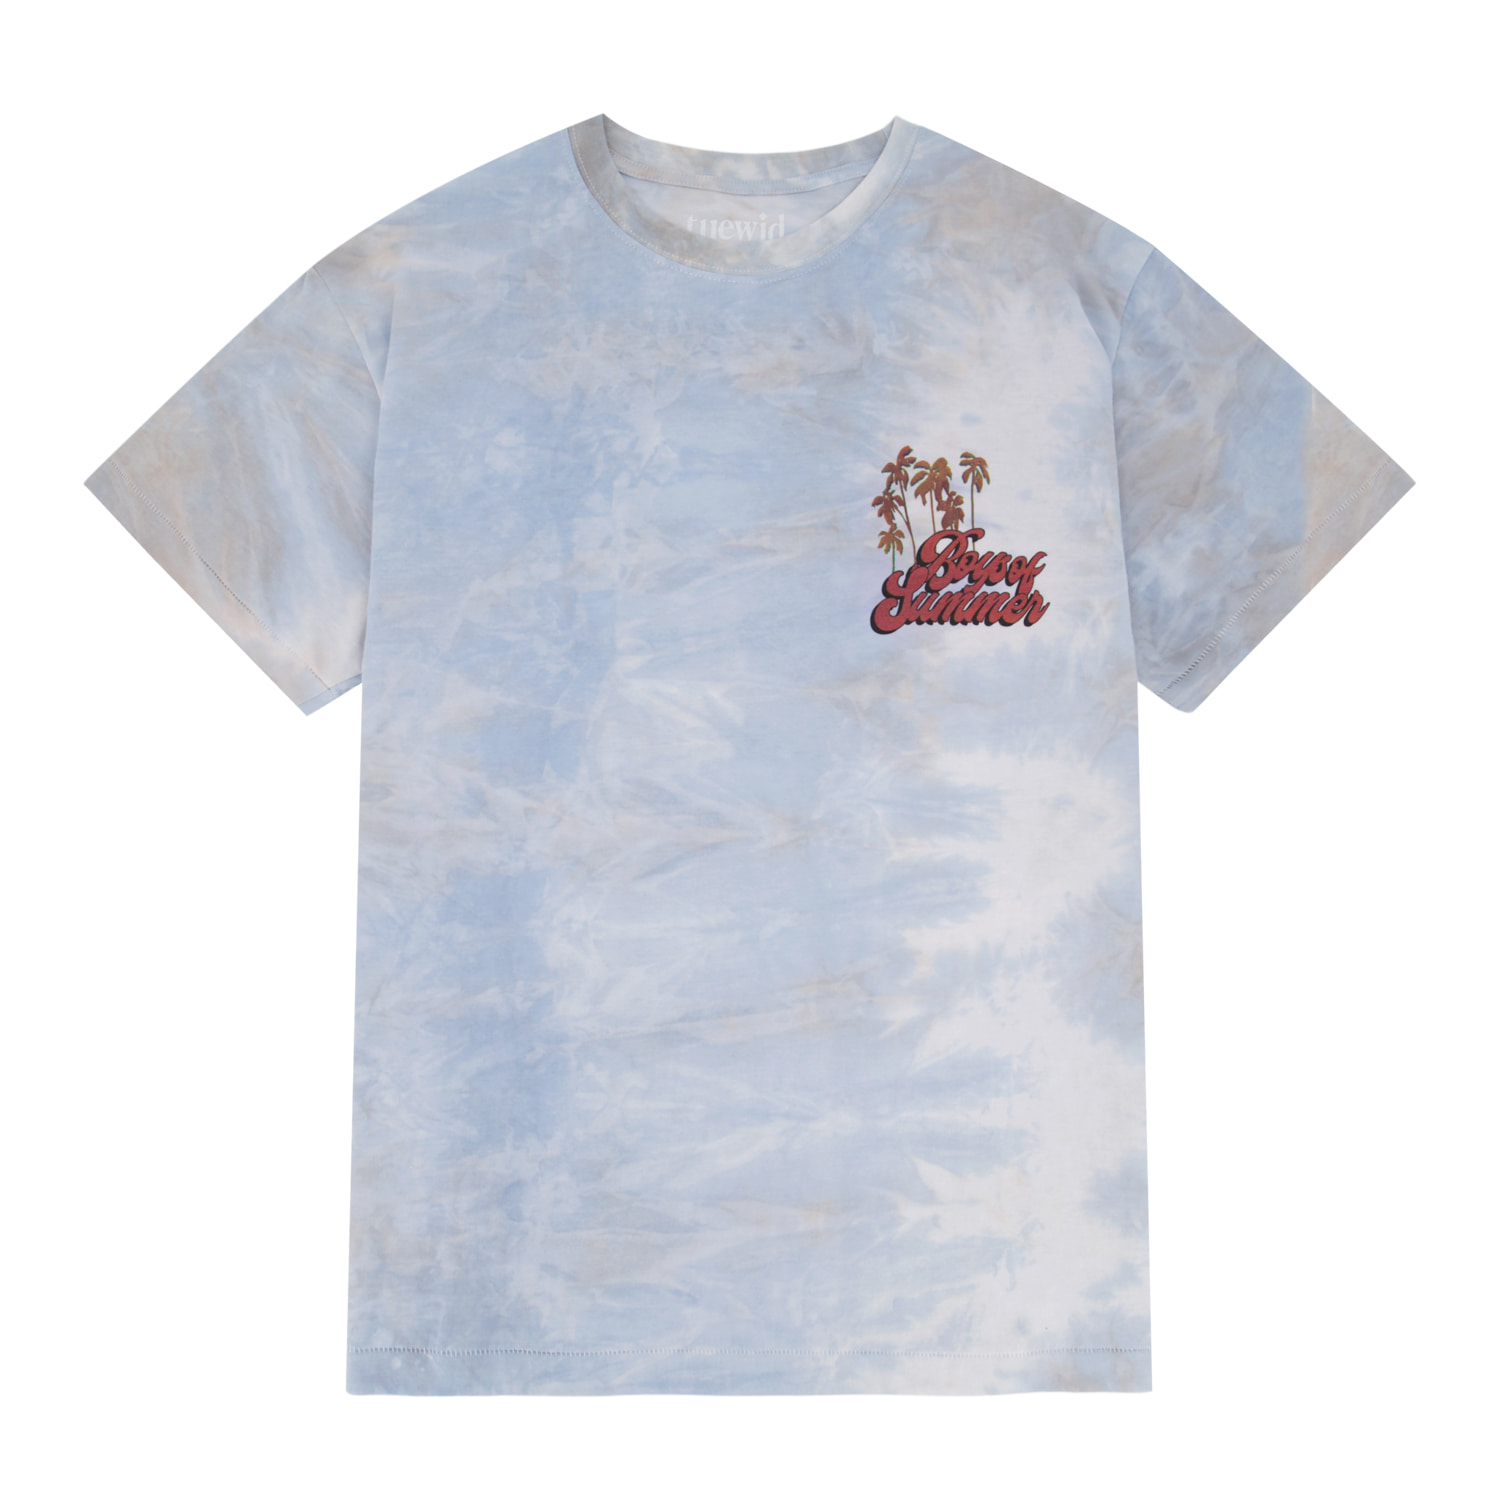 Tuewid day boys of summer t-shirts sky blue